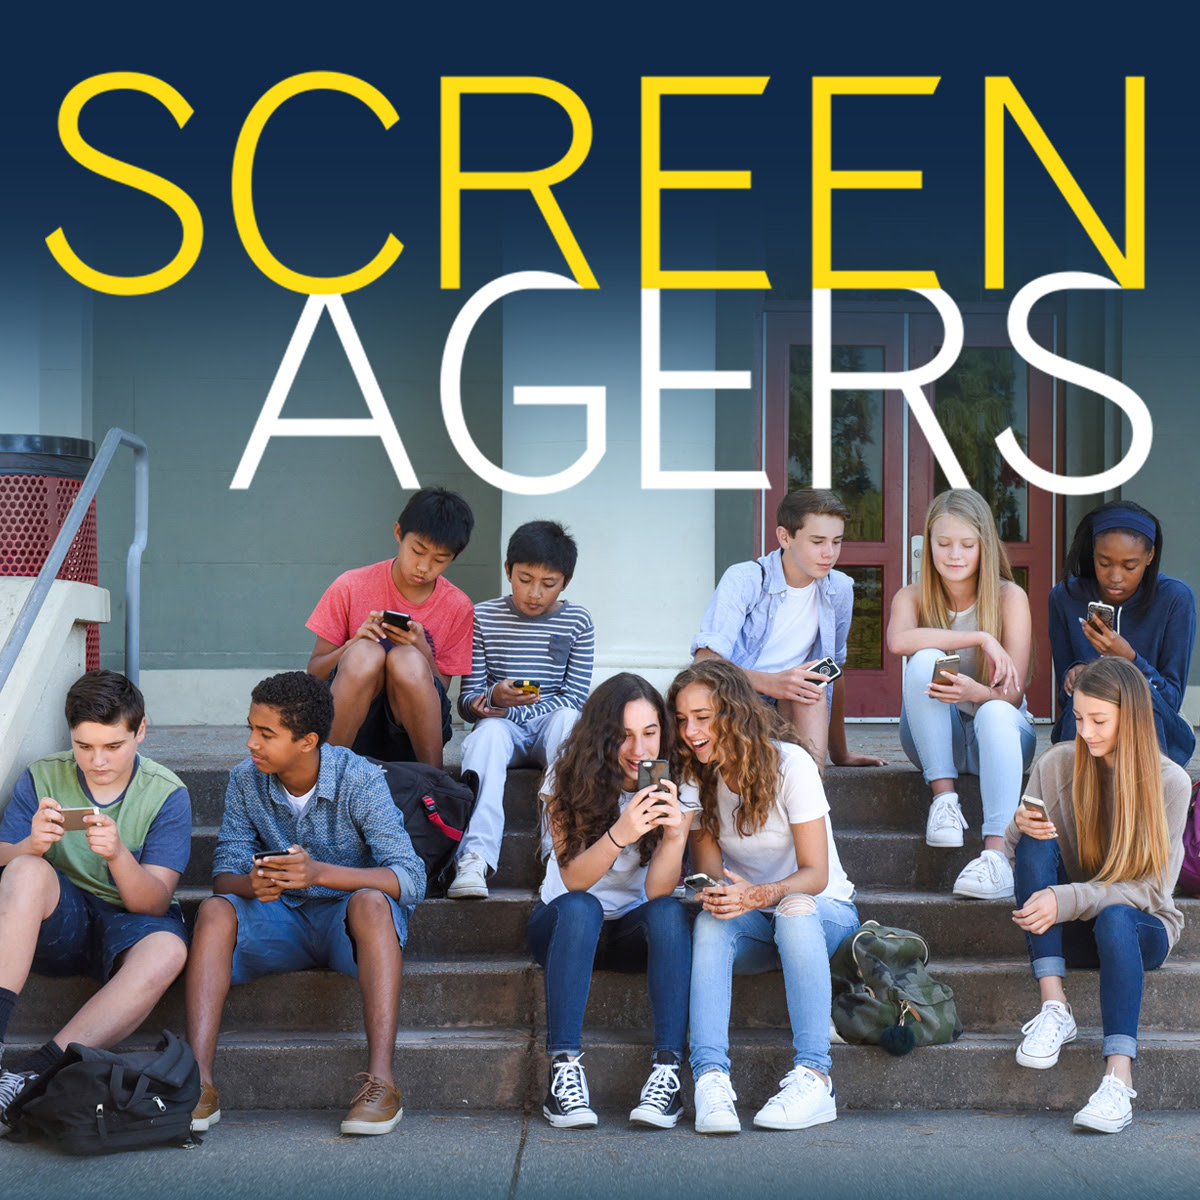 Screenagers Film Presented By Child and Youth Services MST Program